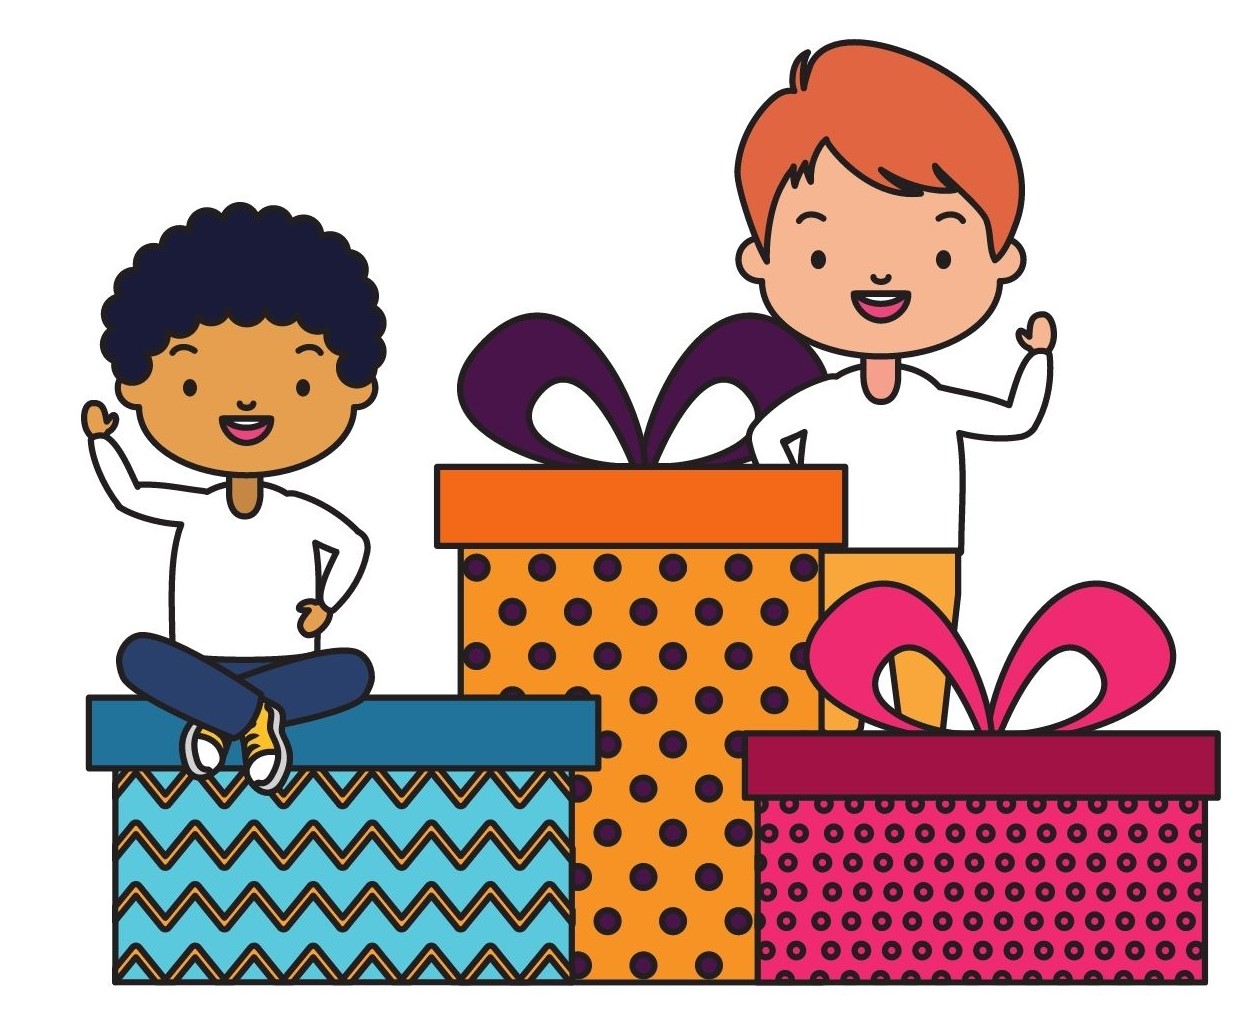 kids gifts